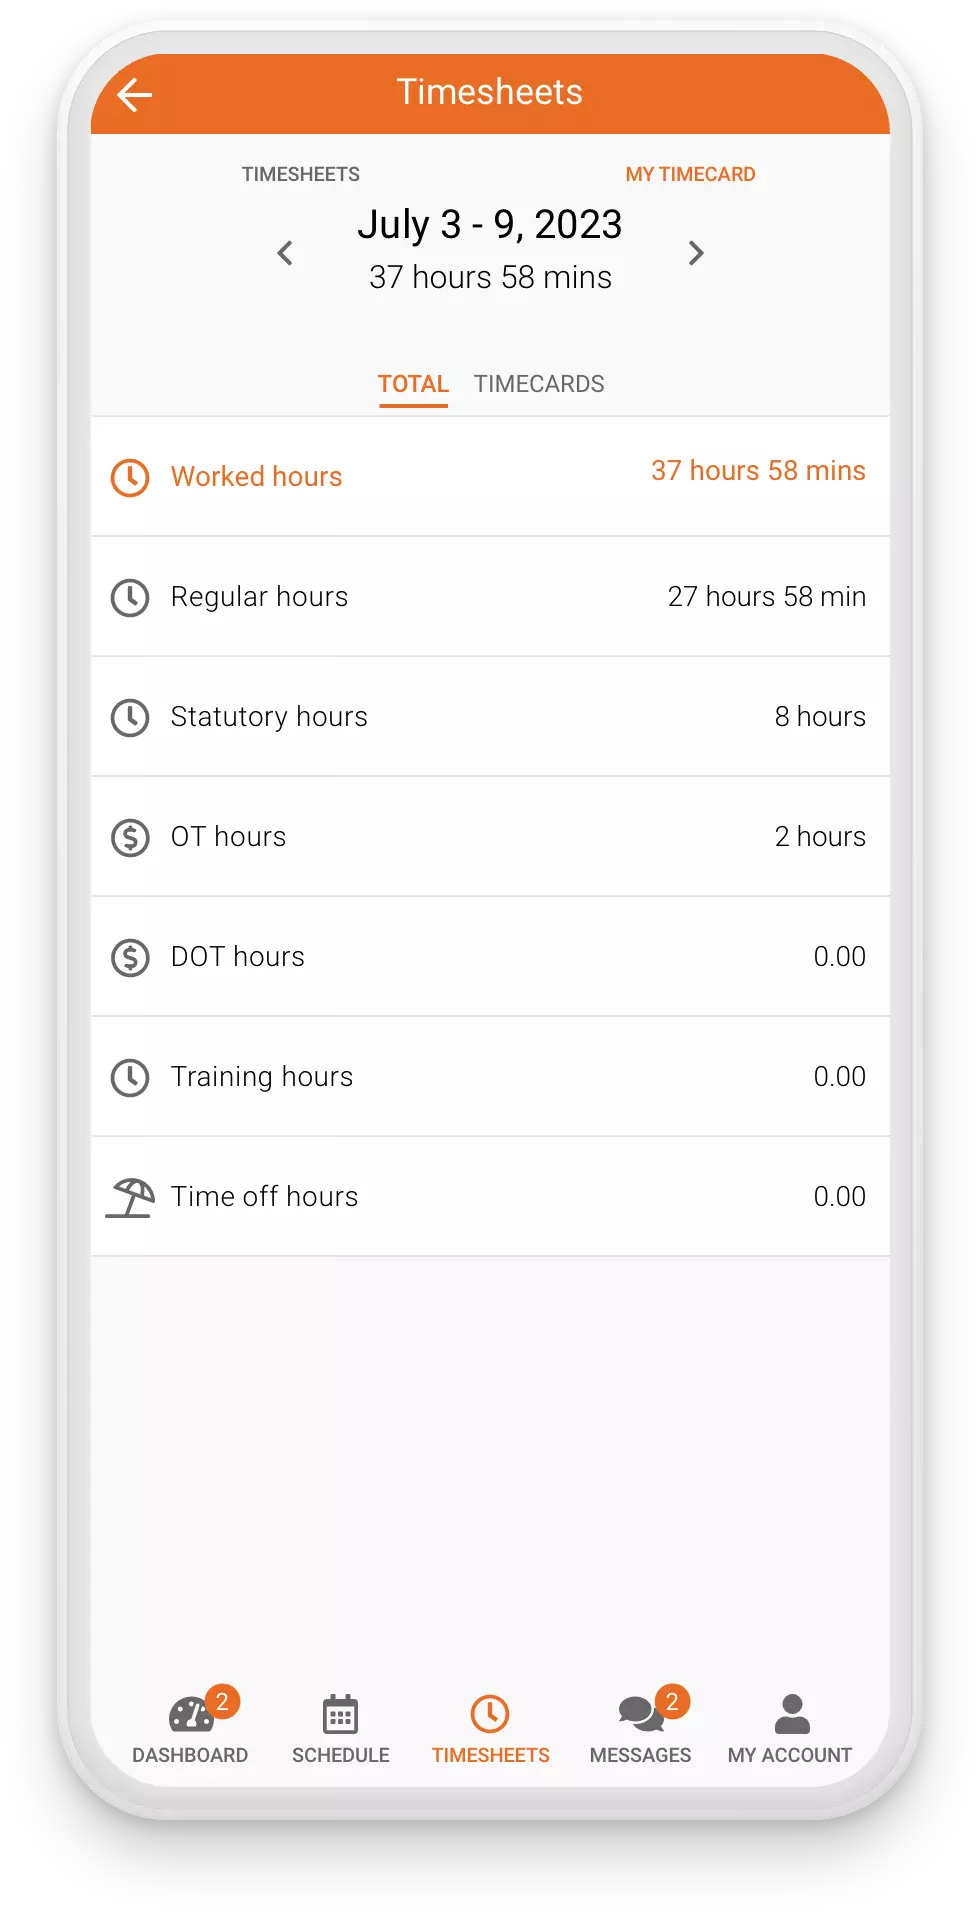 Celayix Mobile showing timesheets and timecards feature